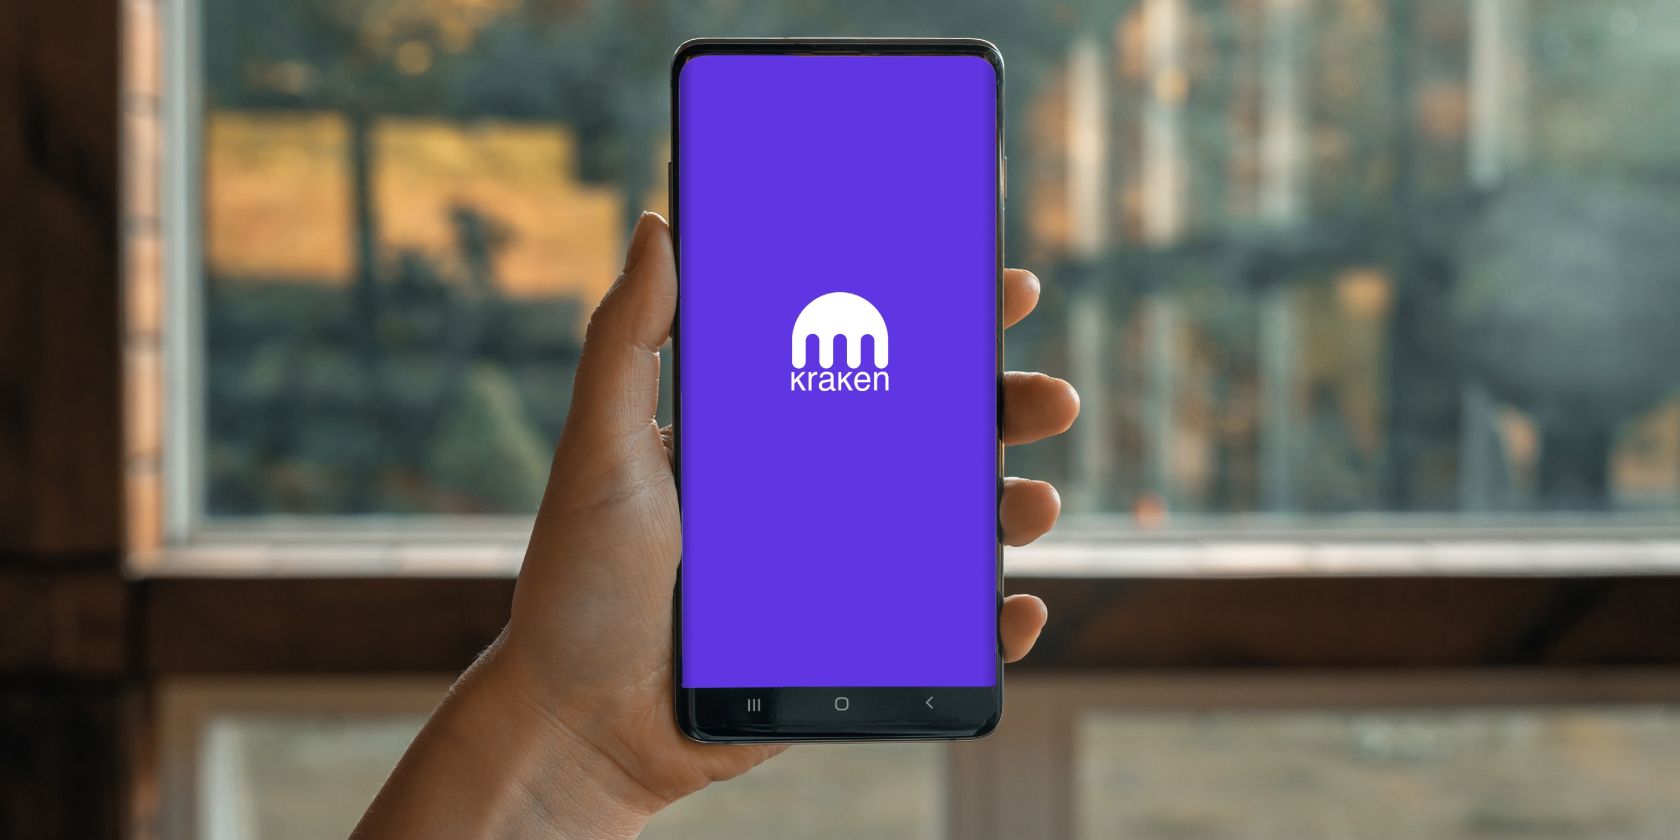 a hand holding a phone with kraken logo on the screen